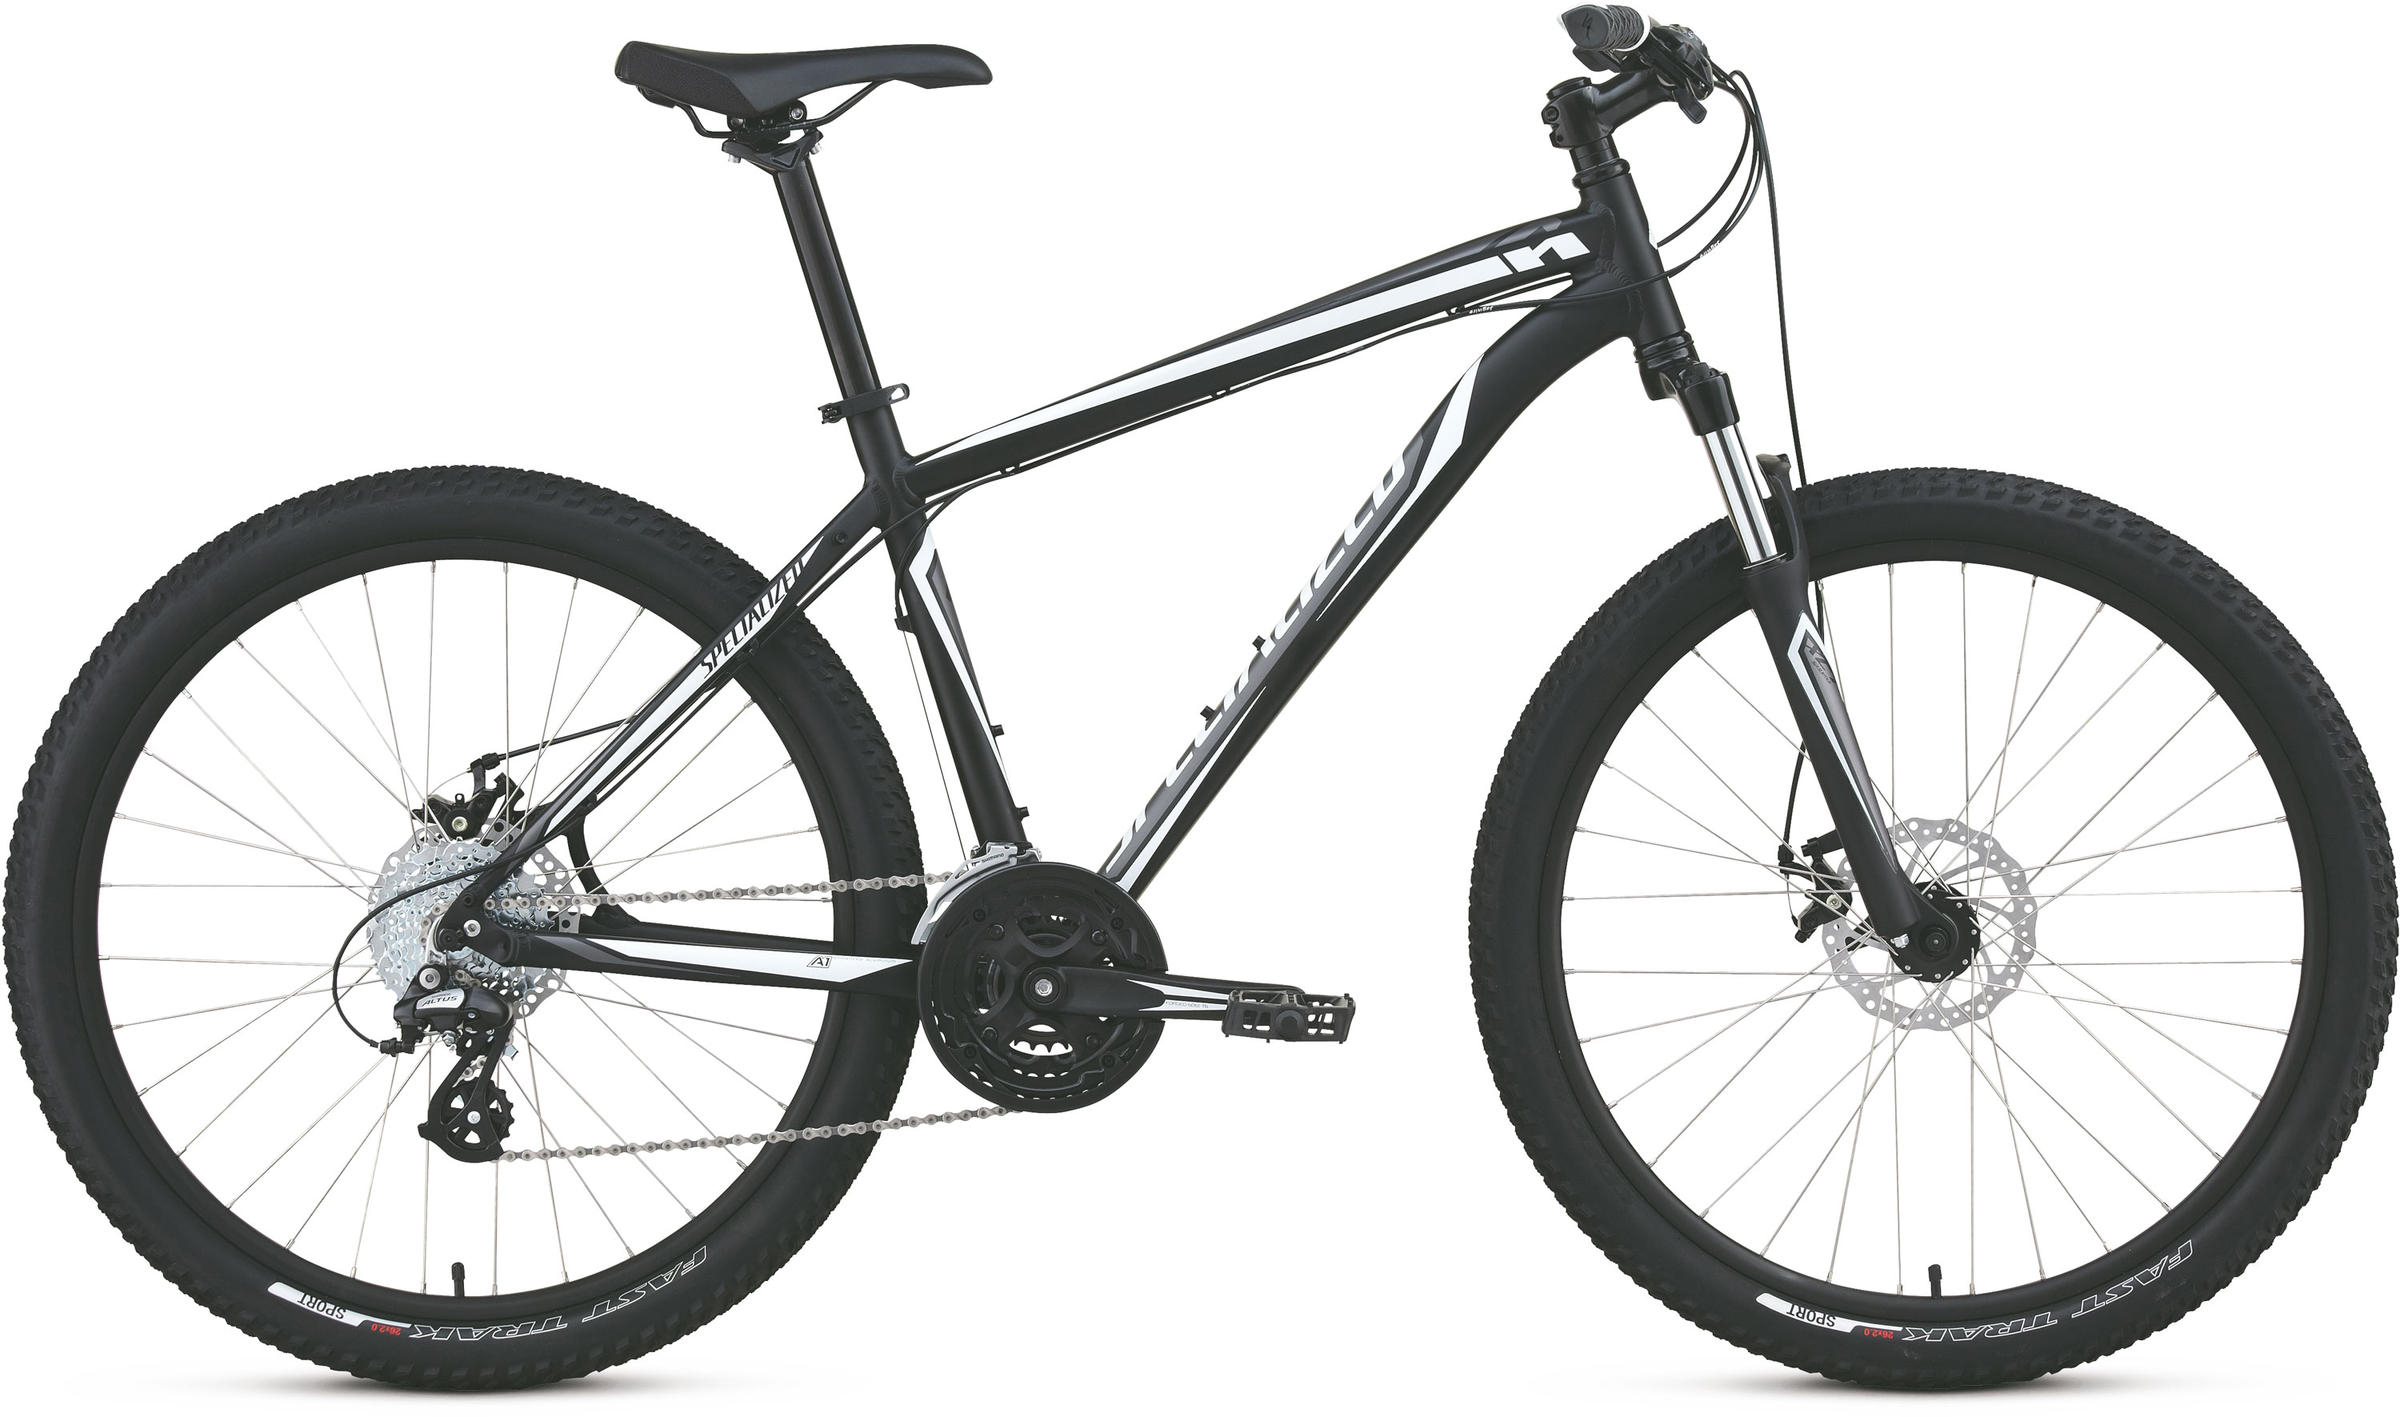 best cheap hybrid bicycle